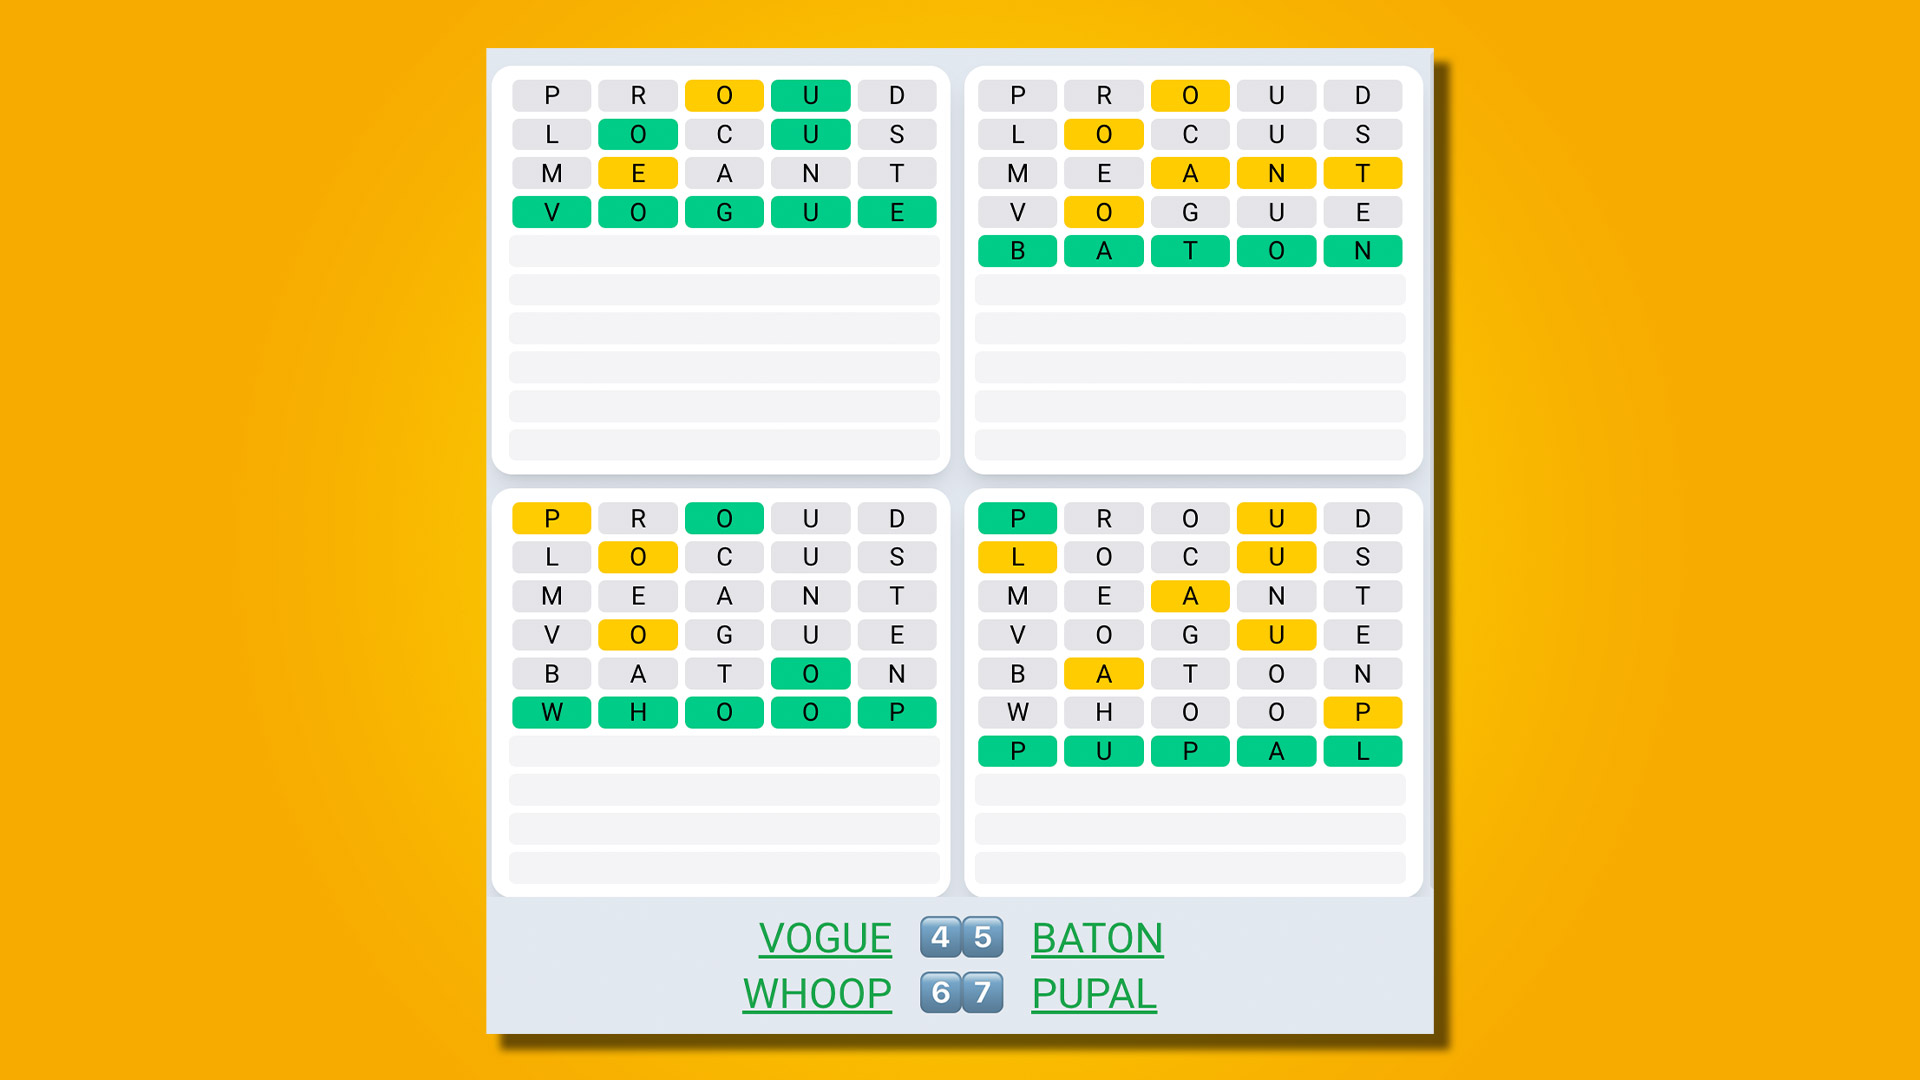 Quordle Daily Sequence answers for game 492 on a yellow background